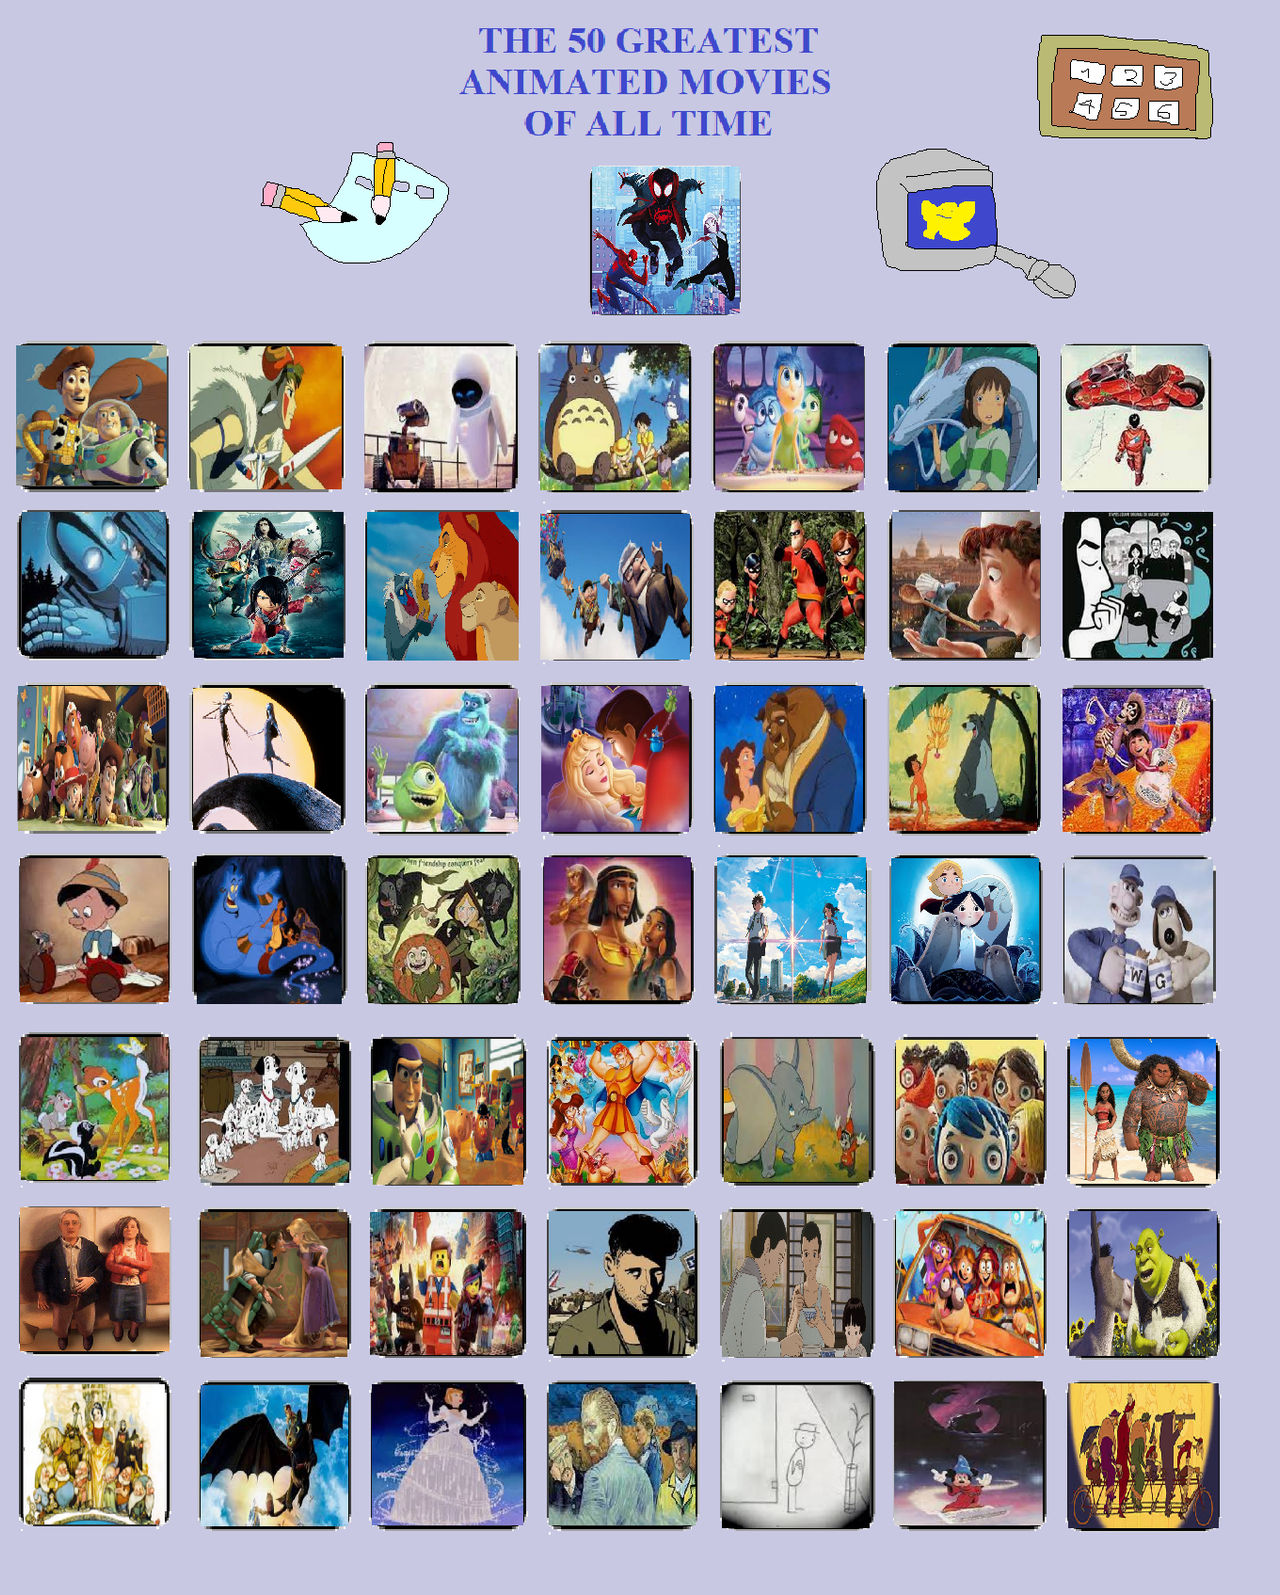 The 50 Best Animated Movies of all Time by Austria-Man on DeviantArt